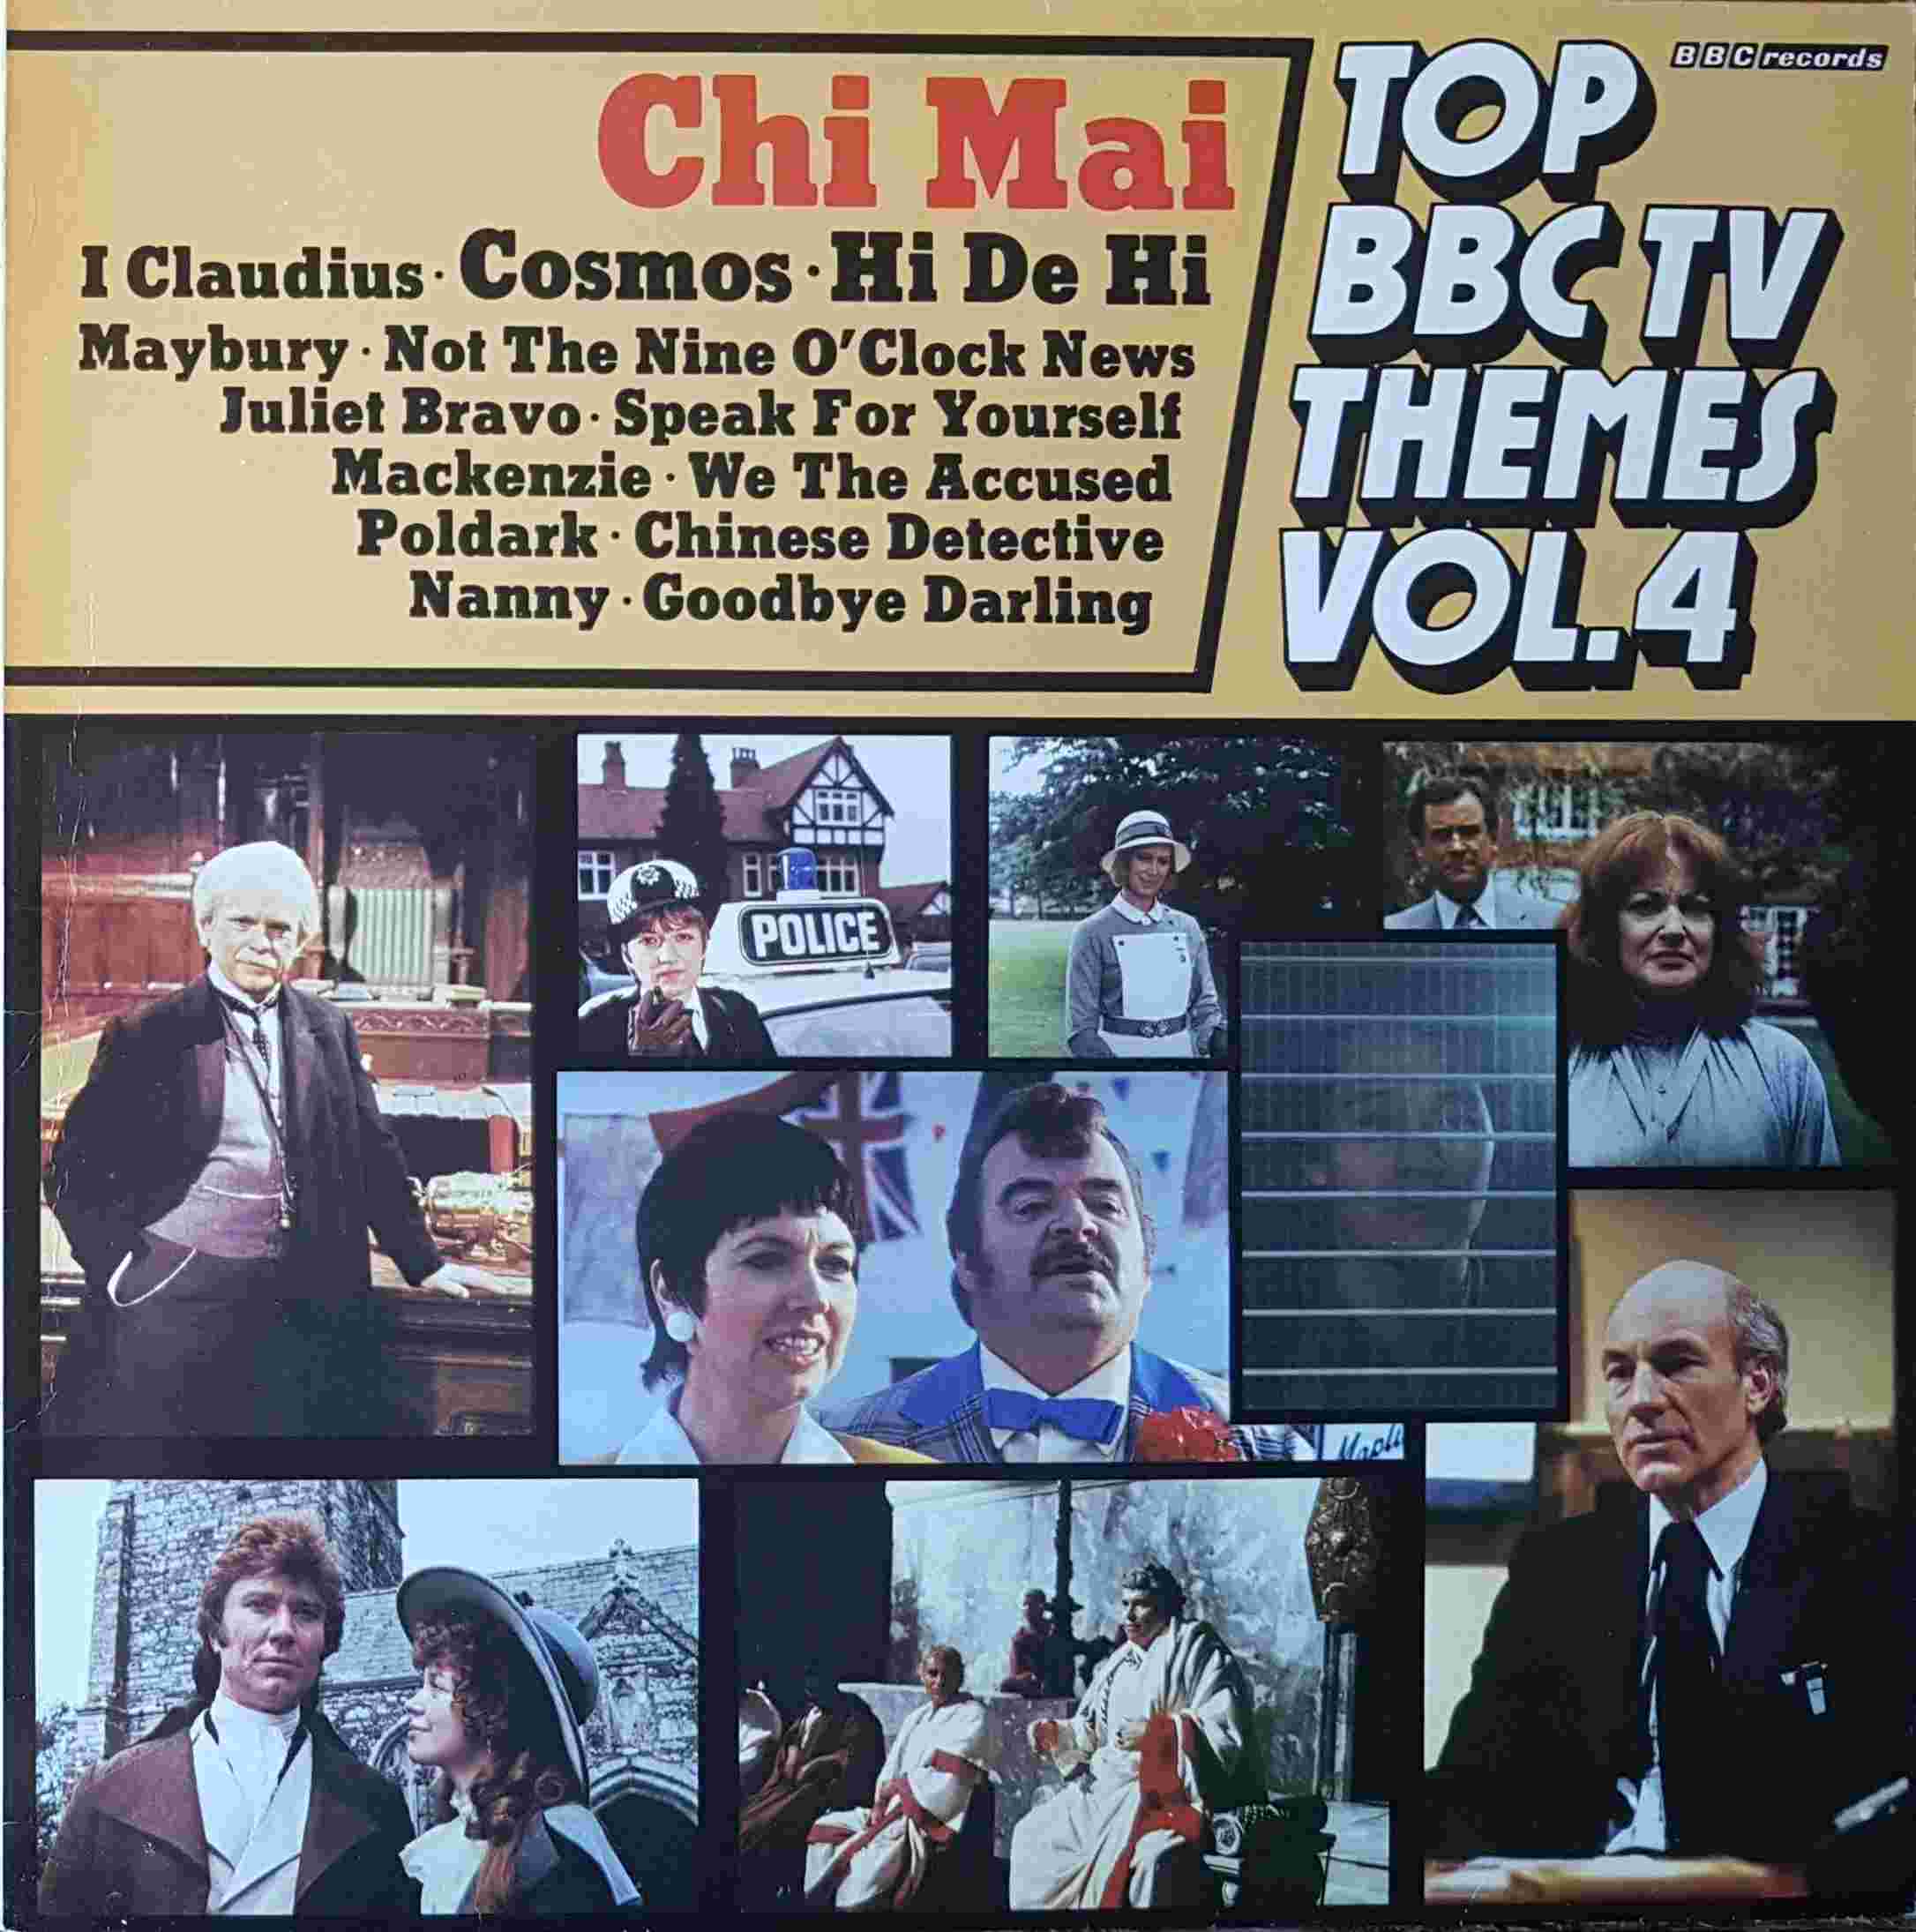 Picture of REH 424 Top BBC TV themes - Volume 4 by artist Various from the BBC albums - Records and Tapes library